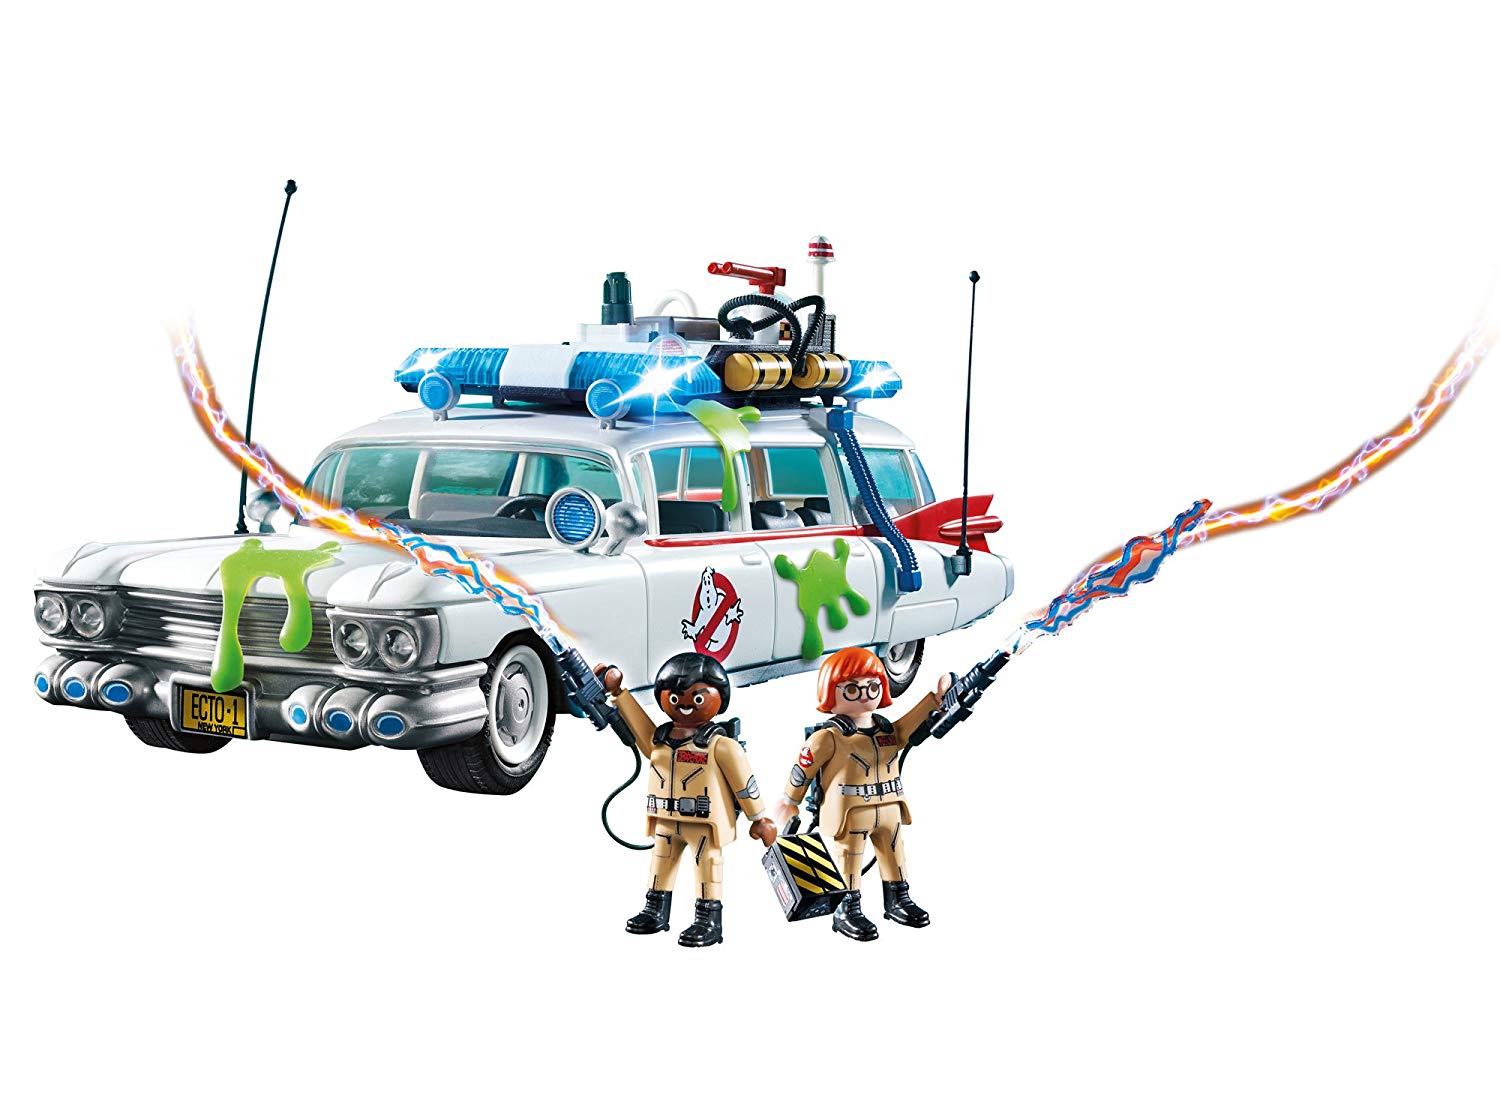 Playmobil Ghostbusters Ecto-1.